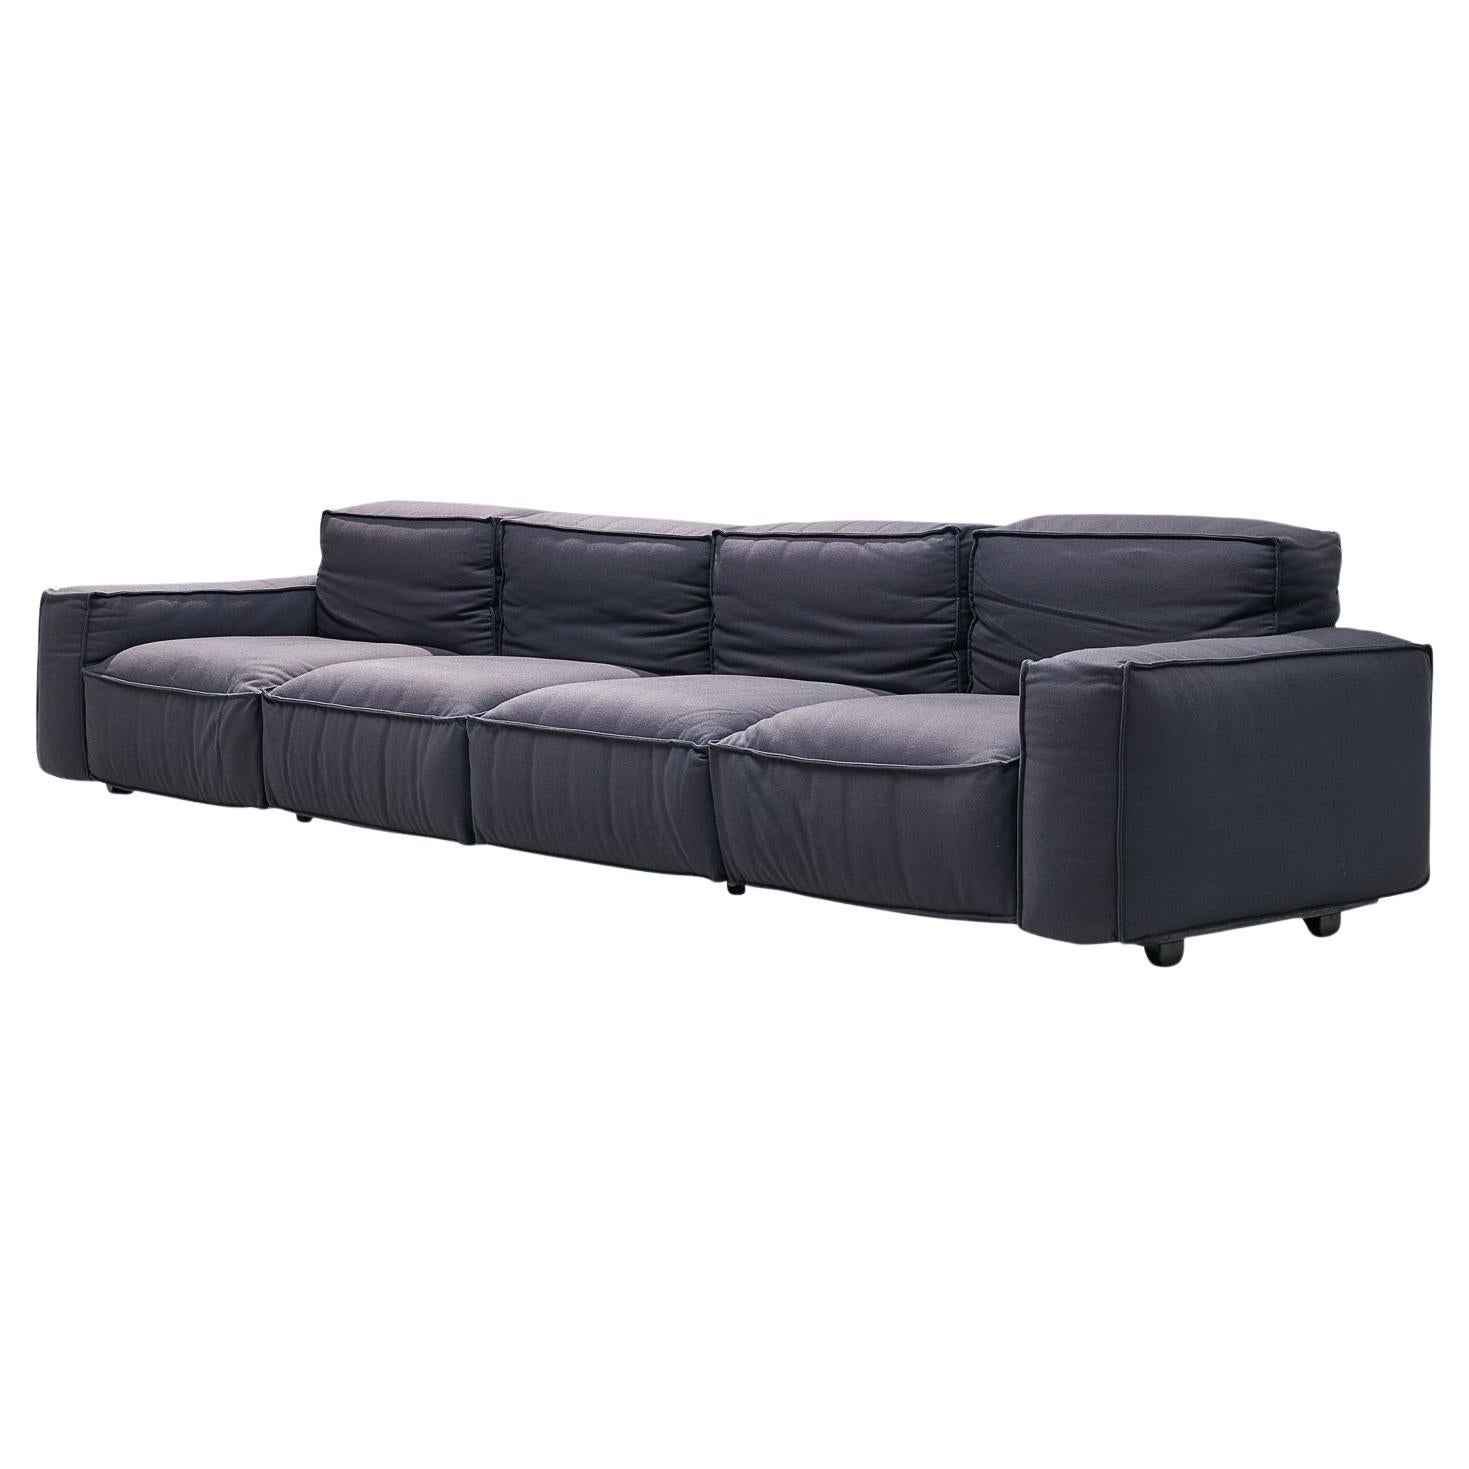 Mario Marenco for Arflex Four-Seater Sofa in Blue Woolen Upholstery 